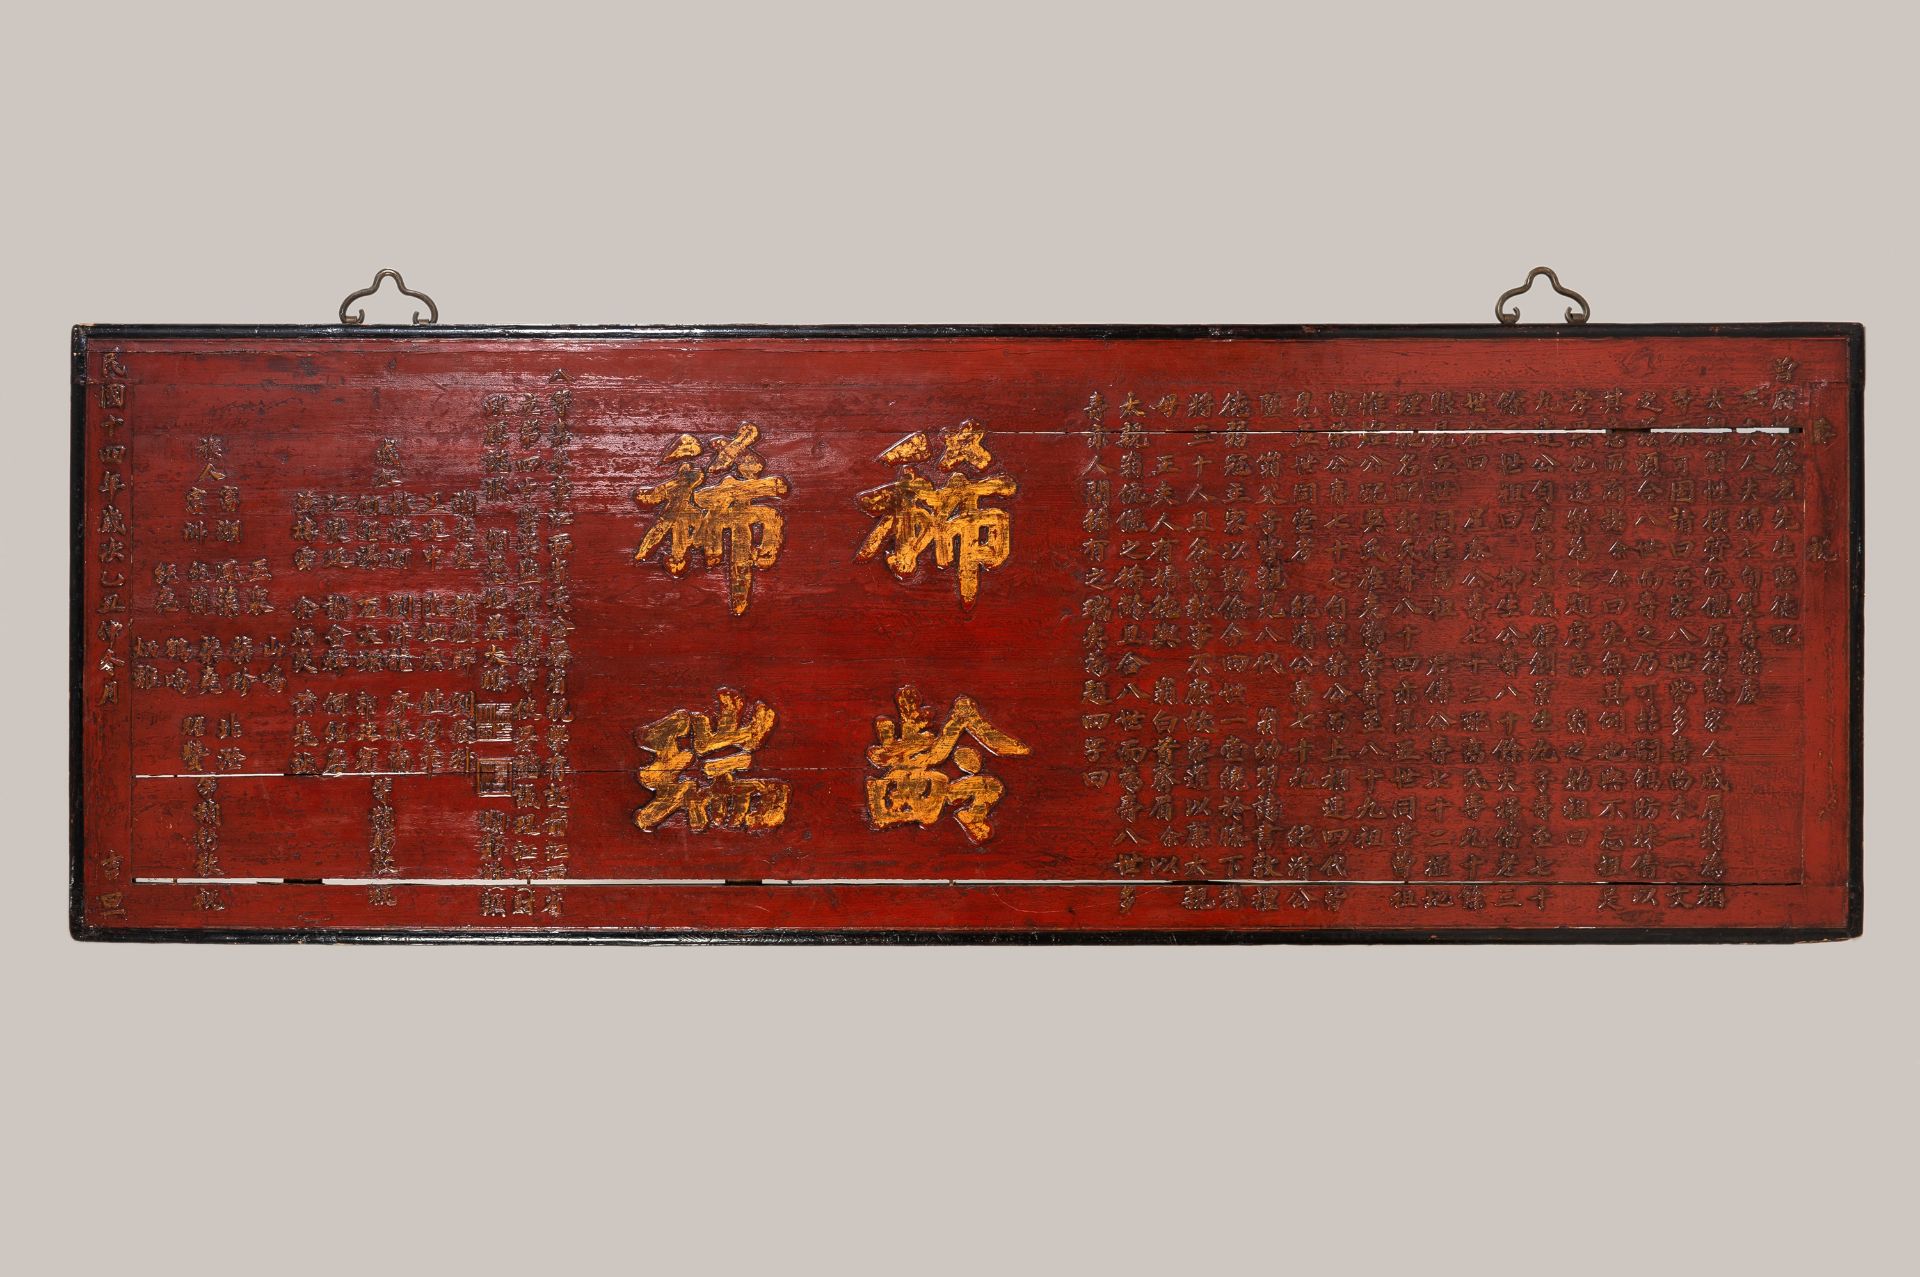 A LARGE CARVED COMMEMORATIVE WOOD PANEL